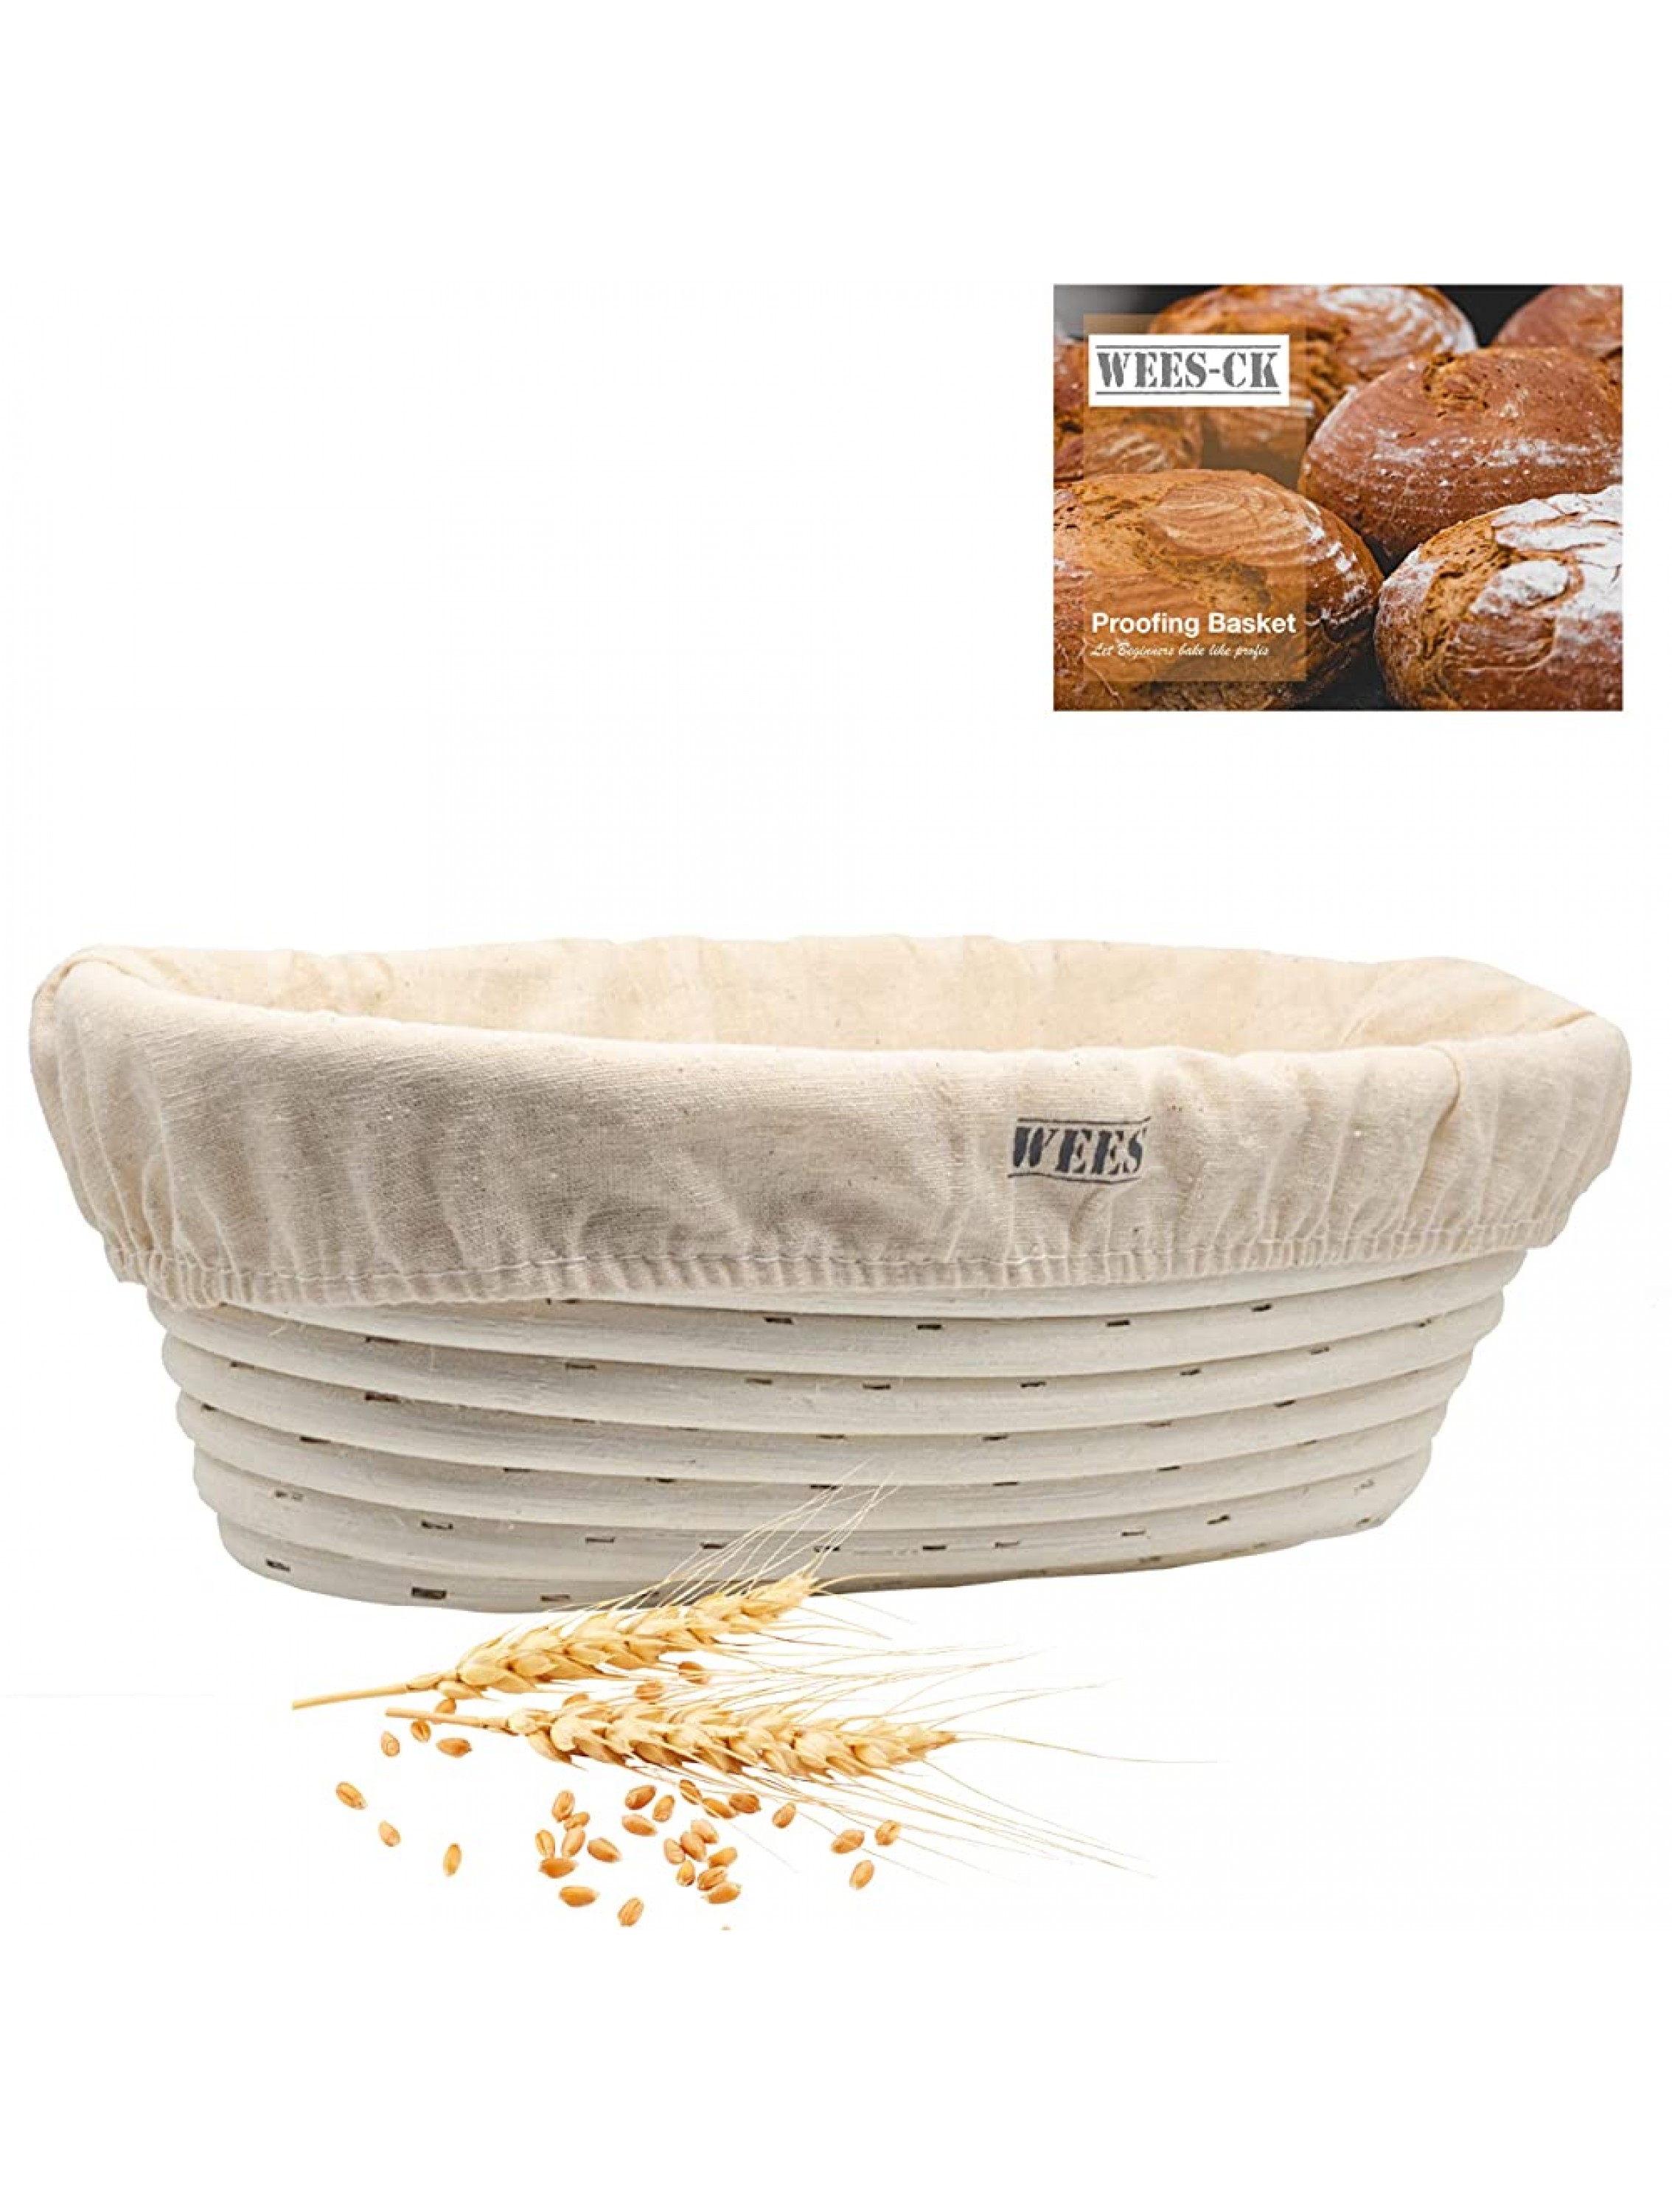 Handmade 10 Inch Bread Banneton Proofing Basket Oval Baking Bowl Dough Gifts for Professional and Home Backers Proving Baskets for Sourdough with Linen Liner Cloth and User Guide - BMPLLLNQ4